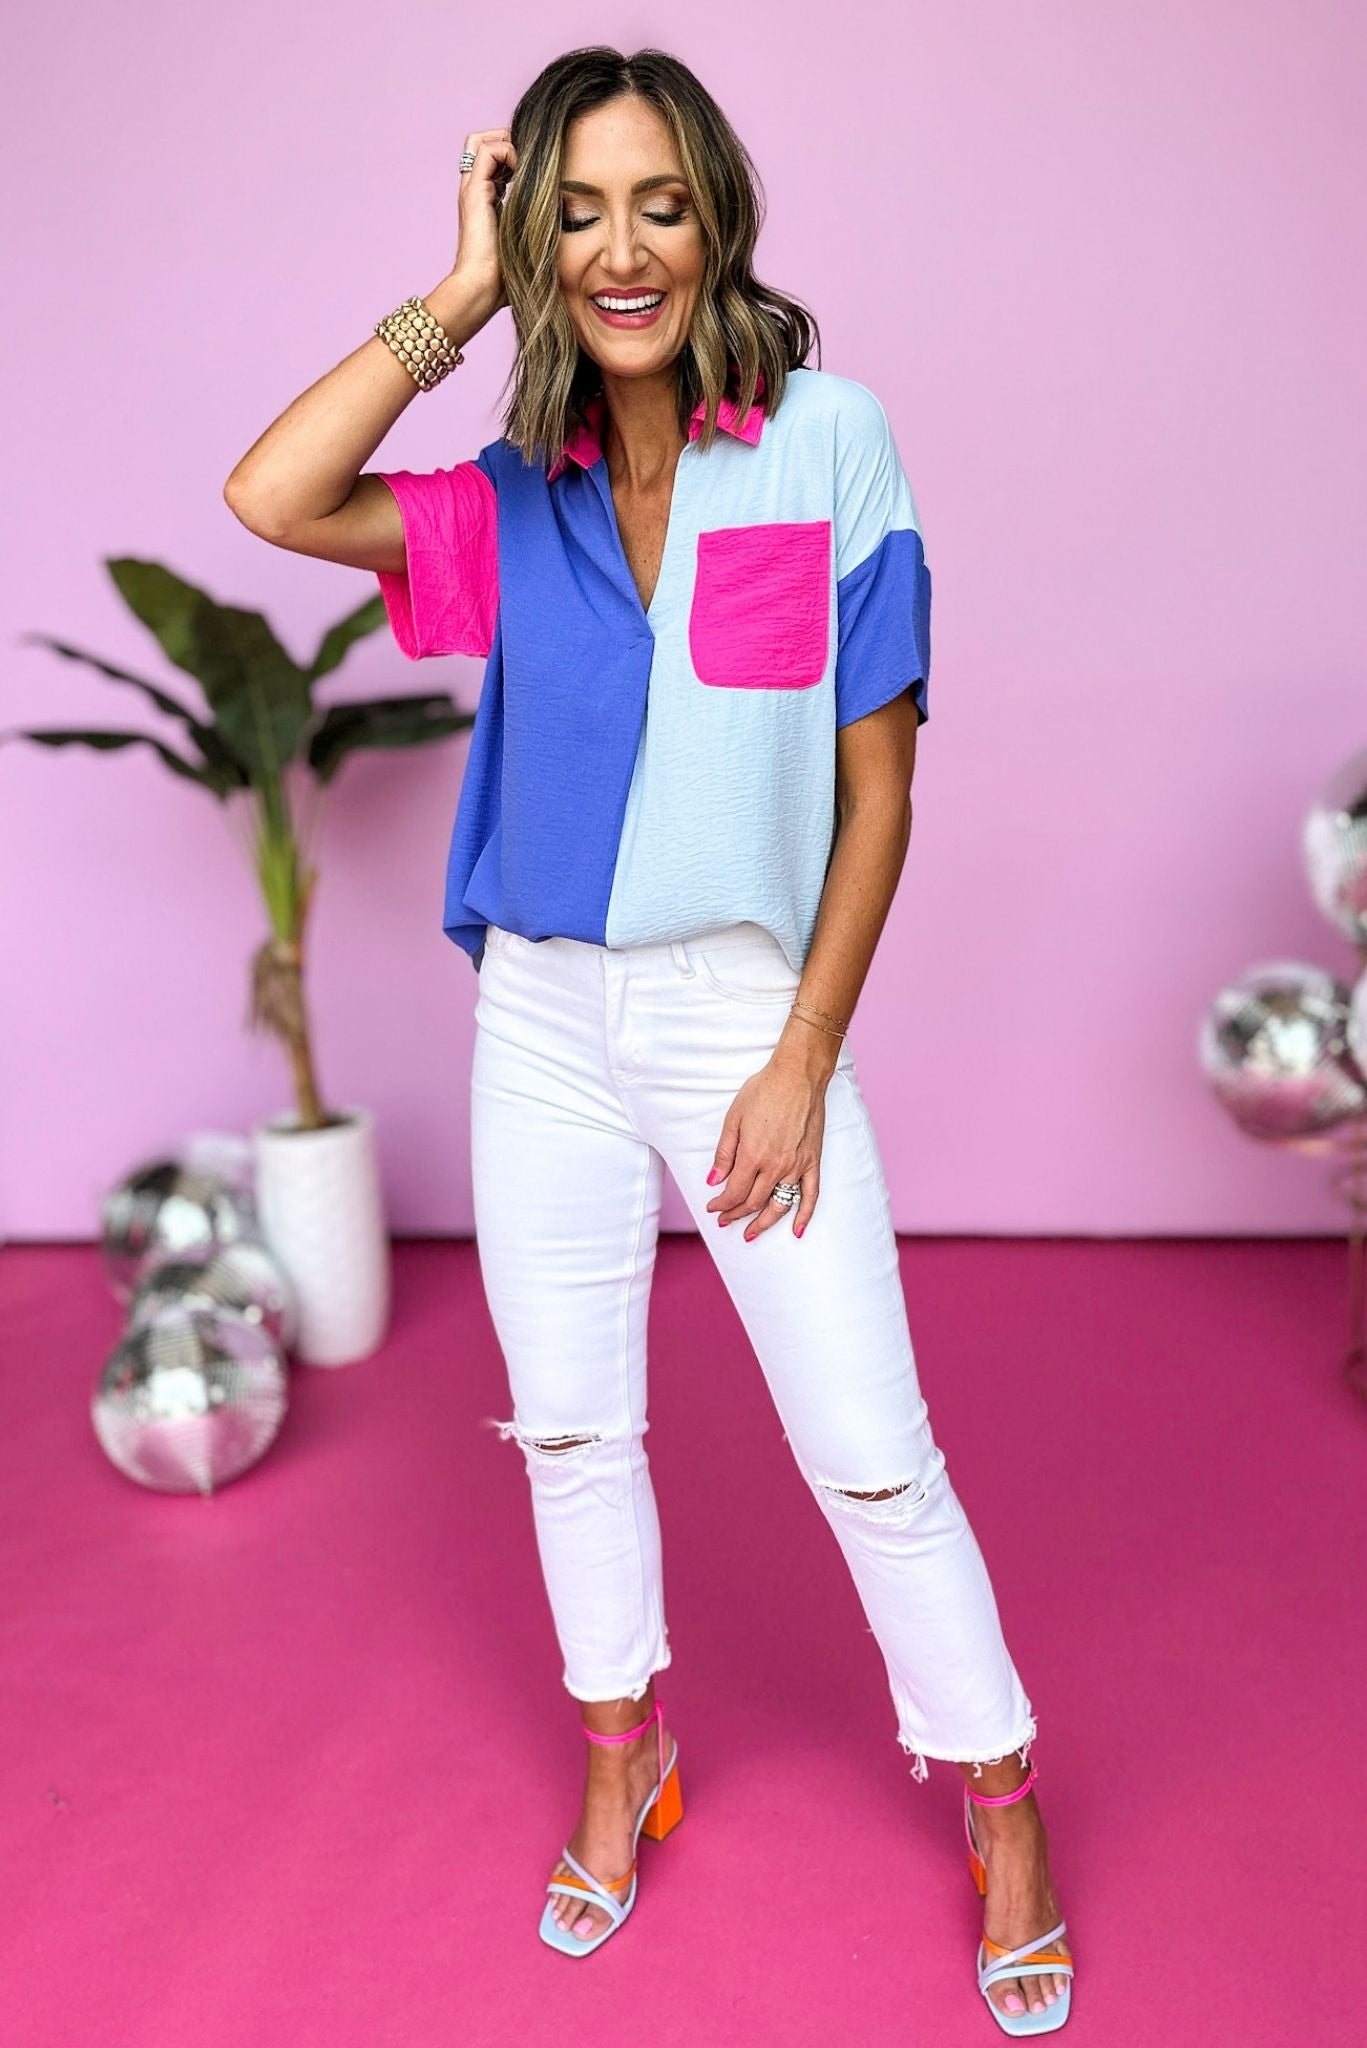 Load image into Gallery viewer, Blue Pink Colorblock Open Collared Top, Colorblock, Neon Top, Summer Top, Short Sleeve Top, Summer Style, Mom Style, Shop Style Your Senses by Mallory Fitzsimmons
